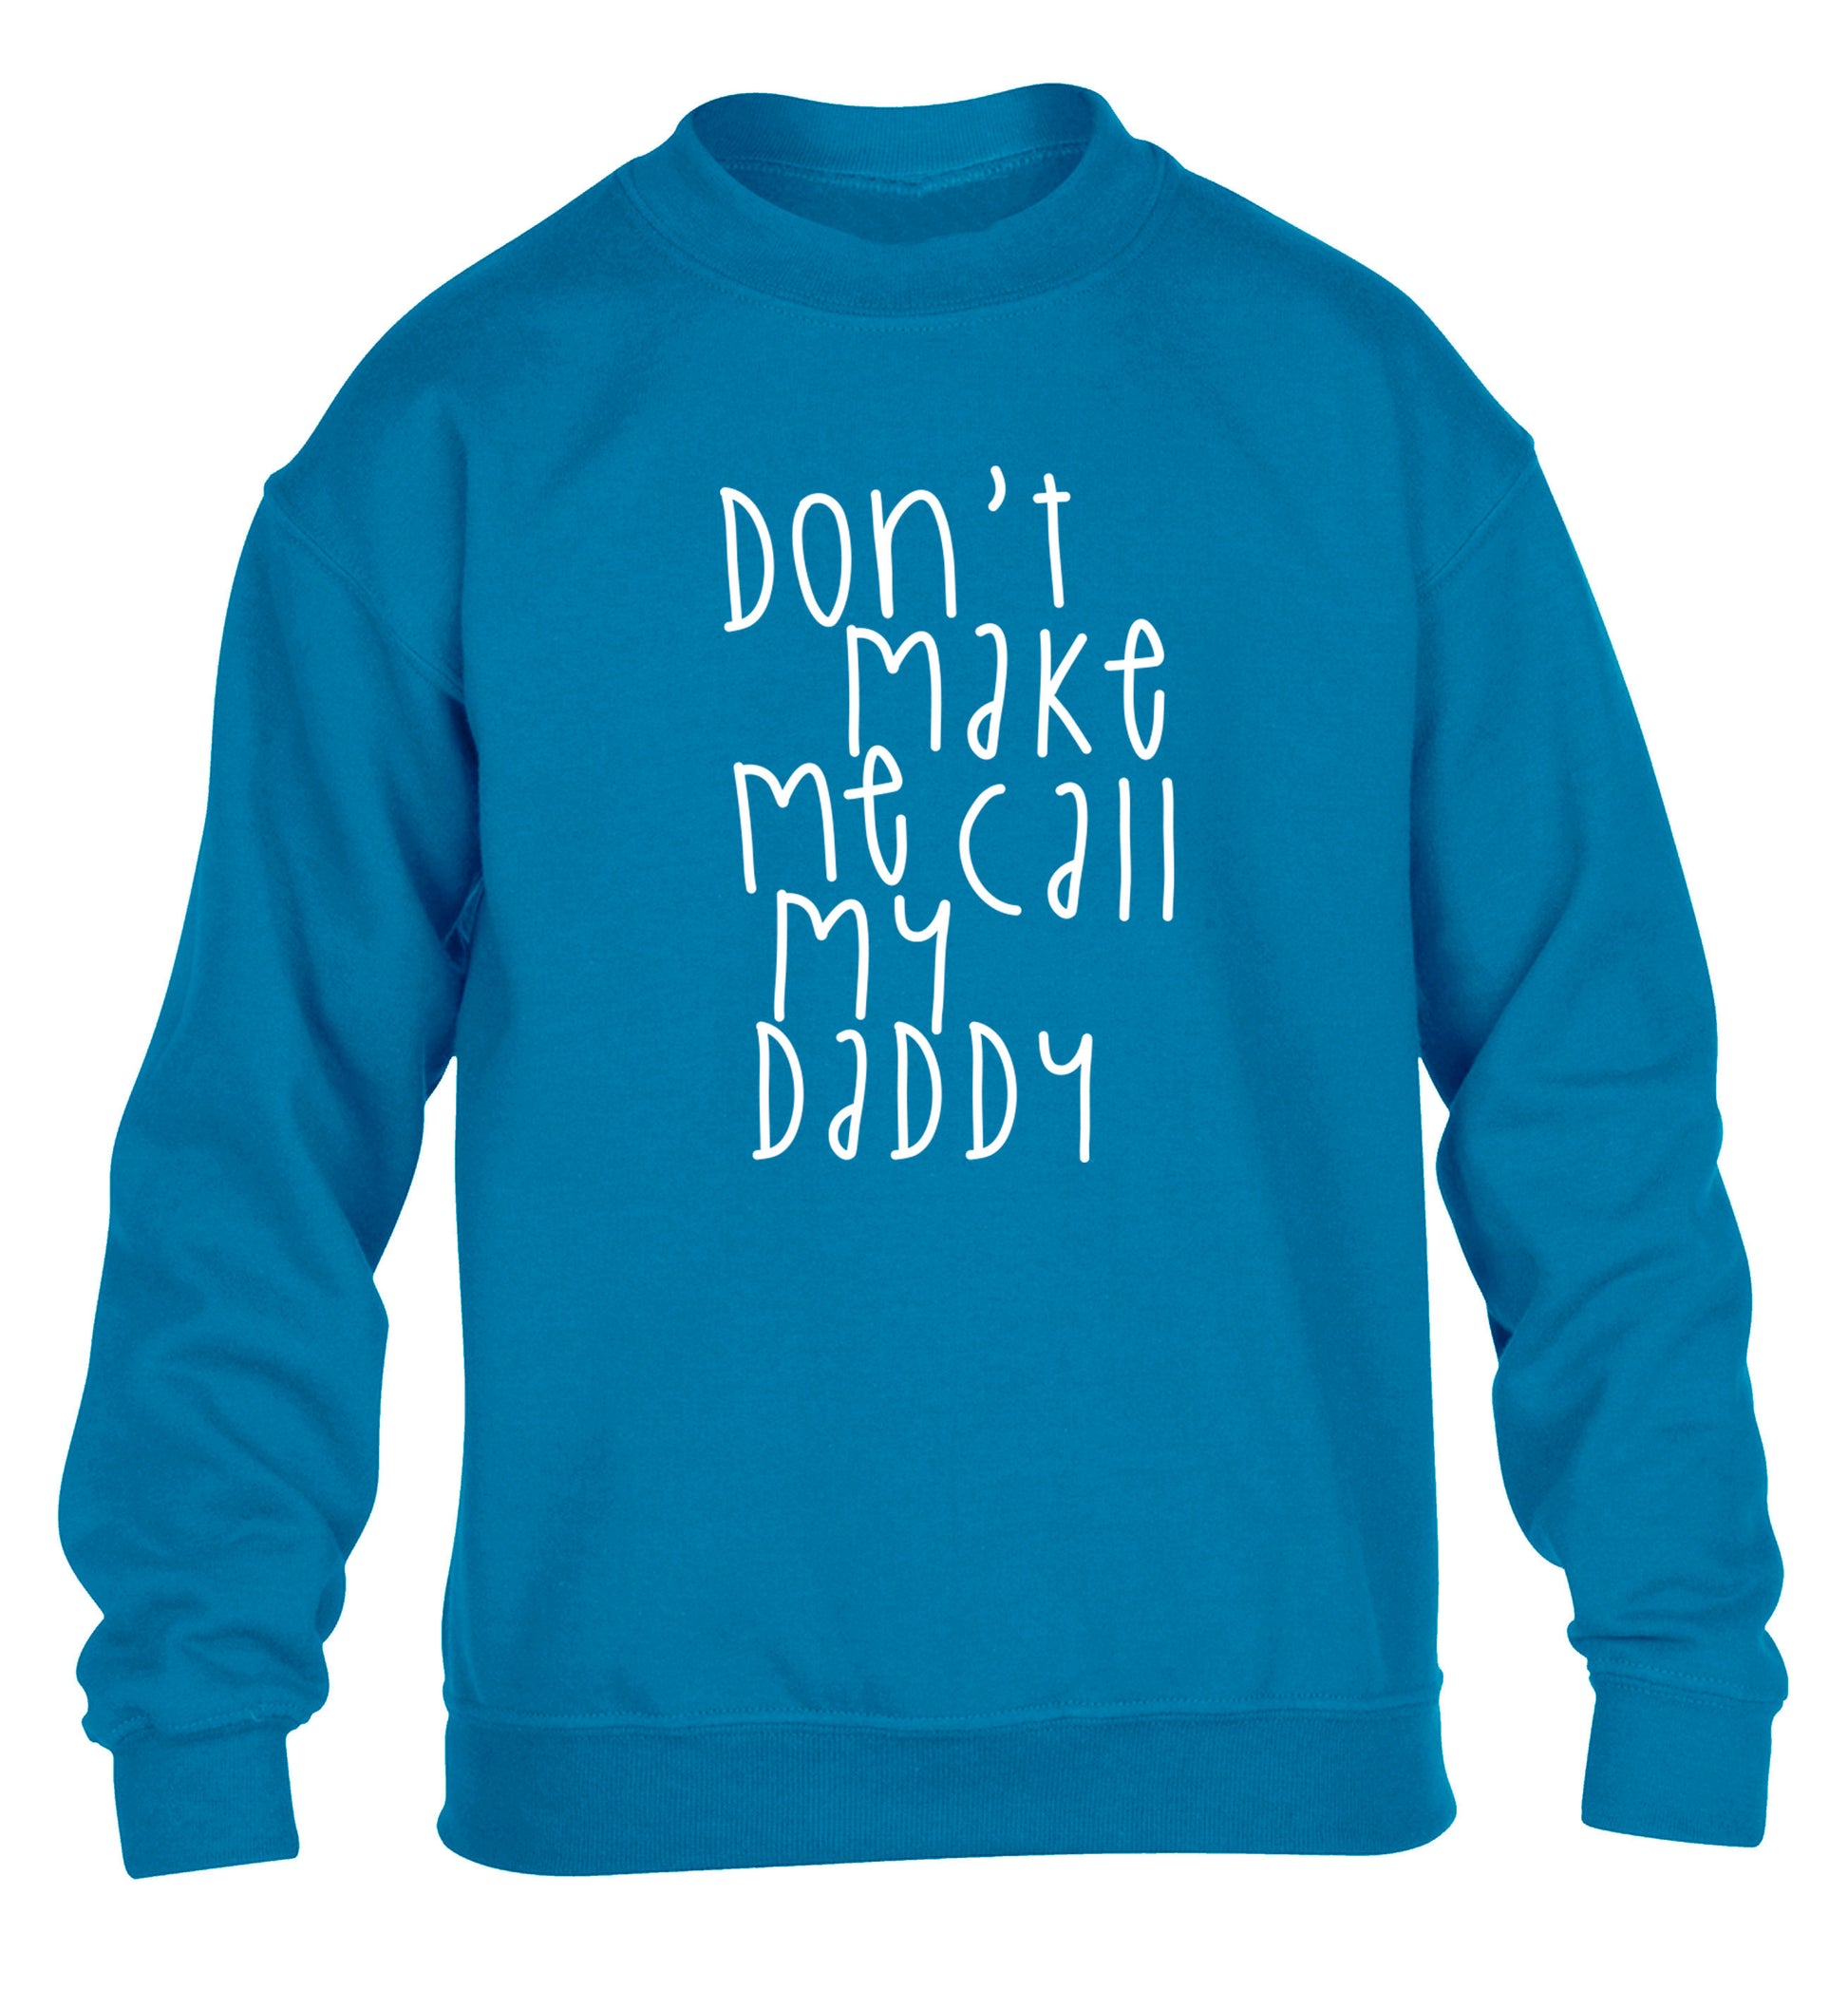 Don't make me call my daddy children's blue sweater 12-14 Years